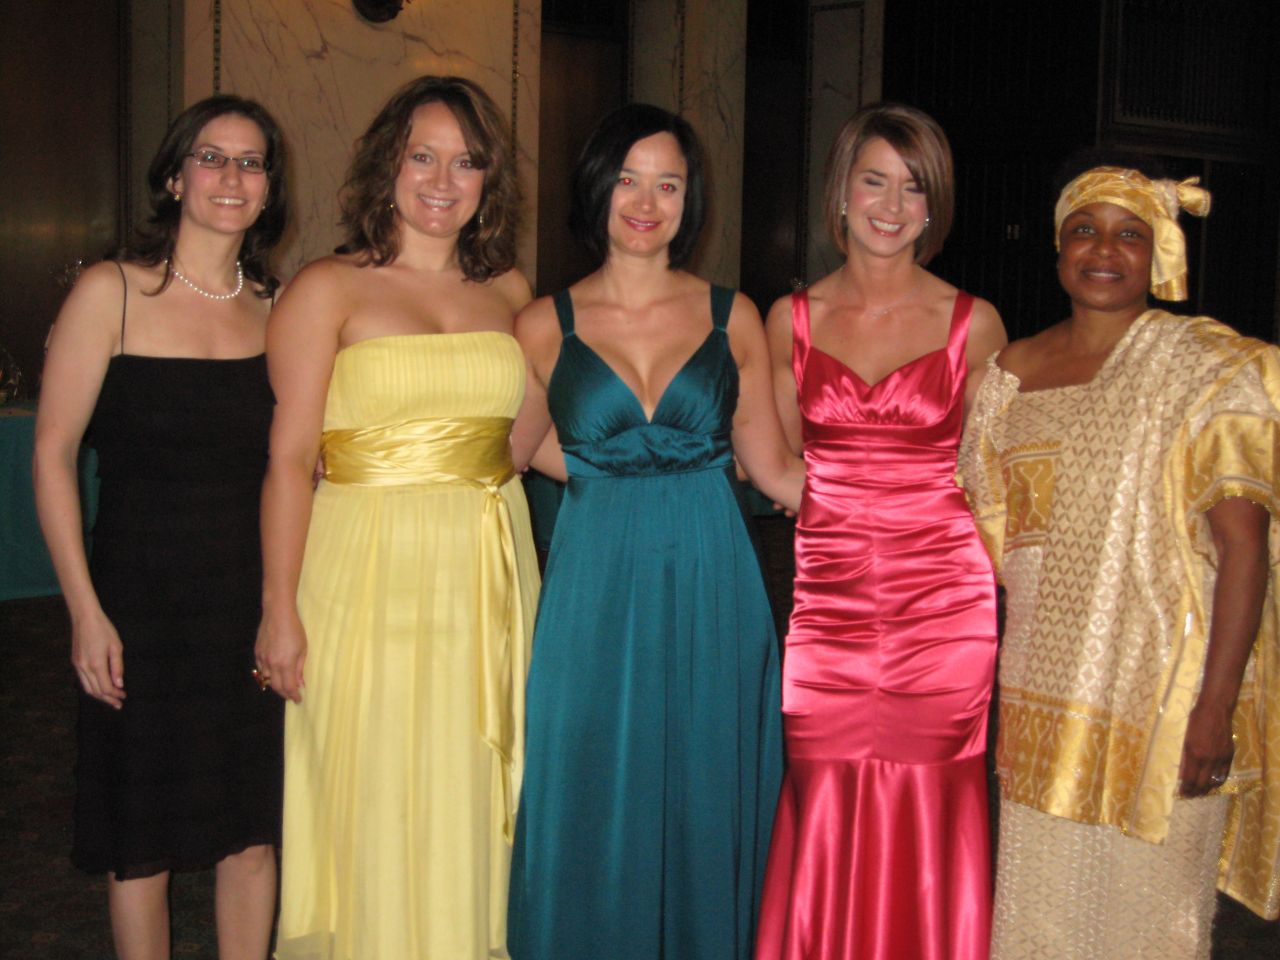 Summer Soiree YLD council members Debra Liss, Heather Fritsch, Adela Lucchesi, Jamie Bas and Arlette Porter